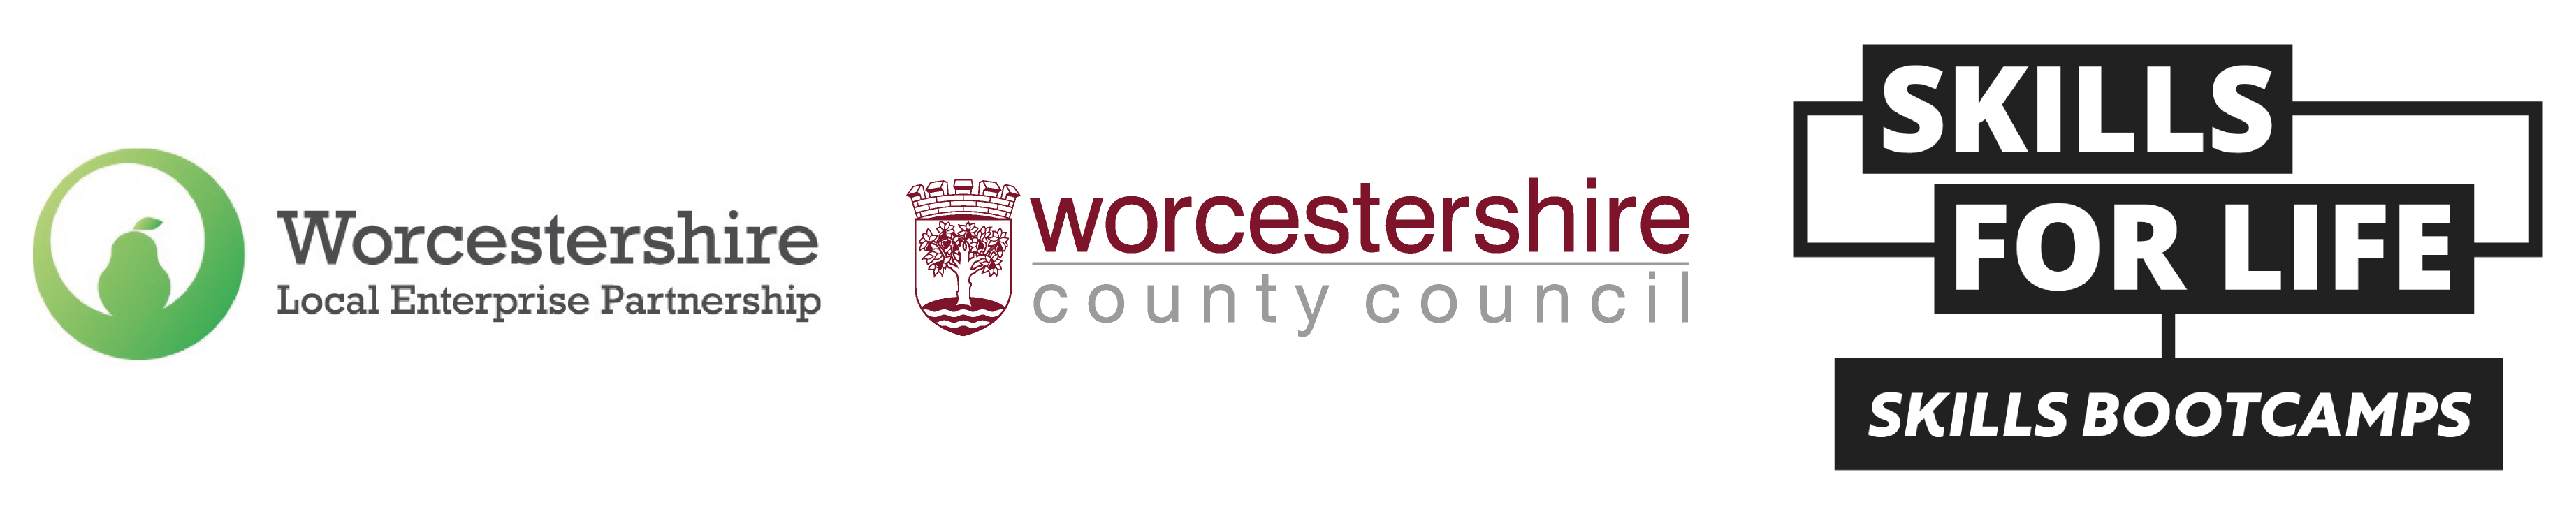 Logo of Worcestershire local enterprise, Worcestershire country council and Skill for life skills bootcamps